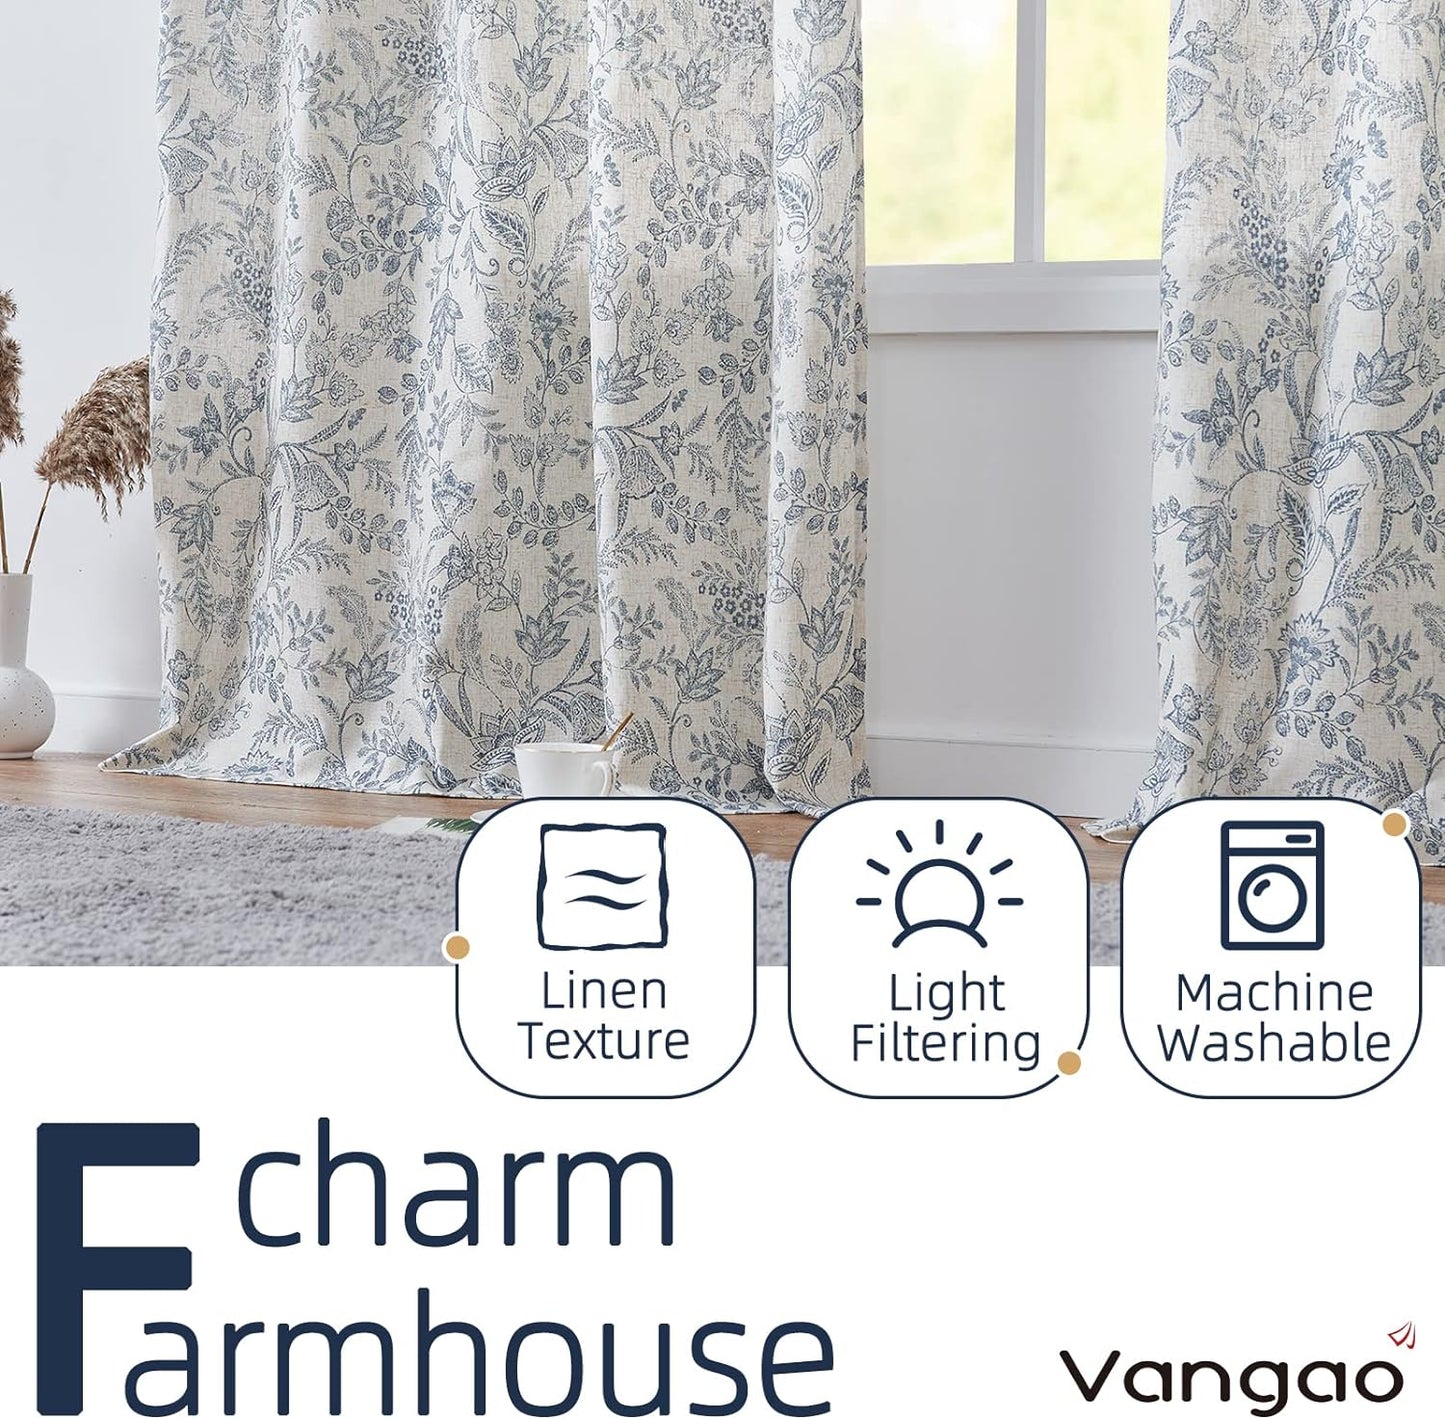 Vangao Blue Floral Linen Curtains for Living Room 84 Inches Long Farmhouse Curtains for Bedroom Vintage Print on Beige Light Filtering Window Drapes Back Tab Rod Pocket 2 Panels  Vangao   